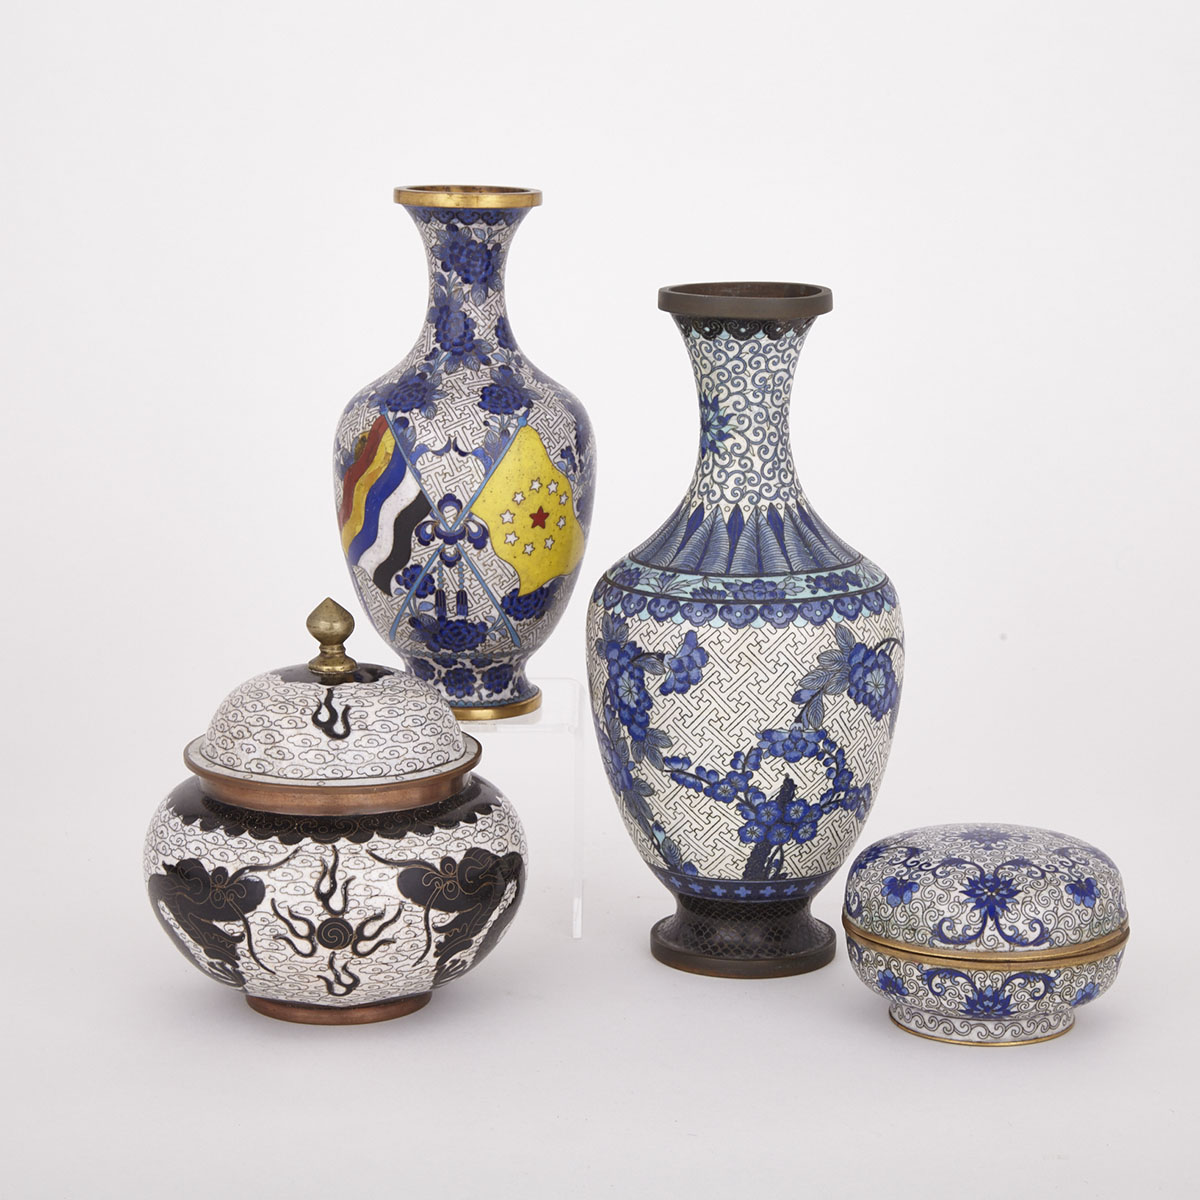 Group of Four Cloisonne Items, Early 20th Century